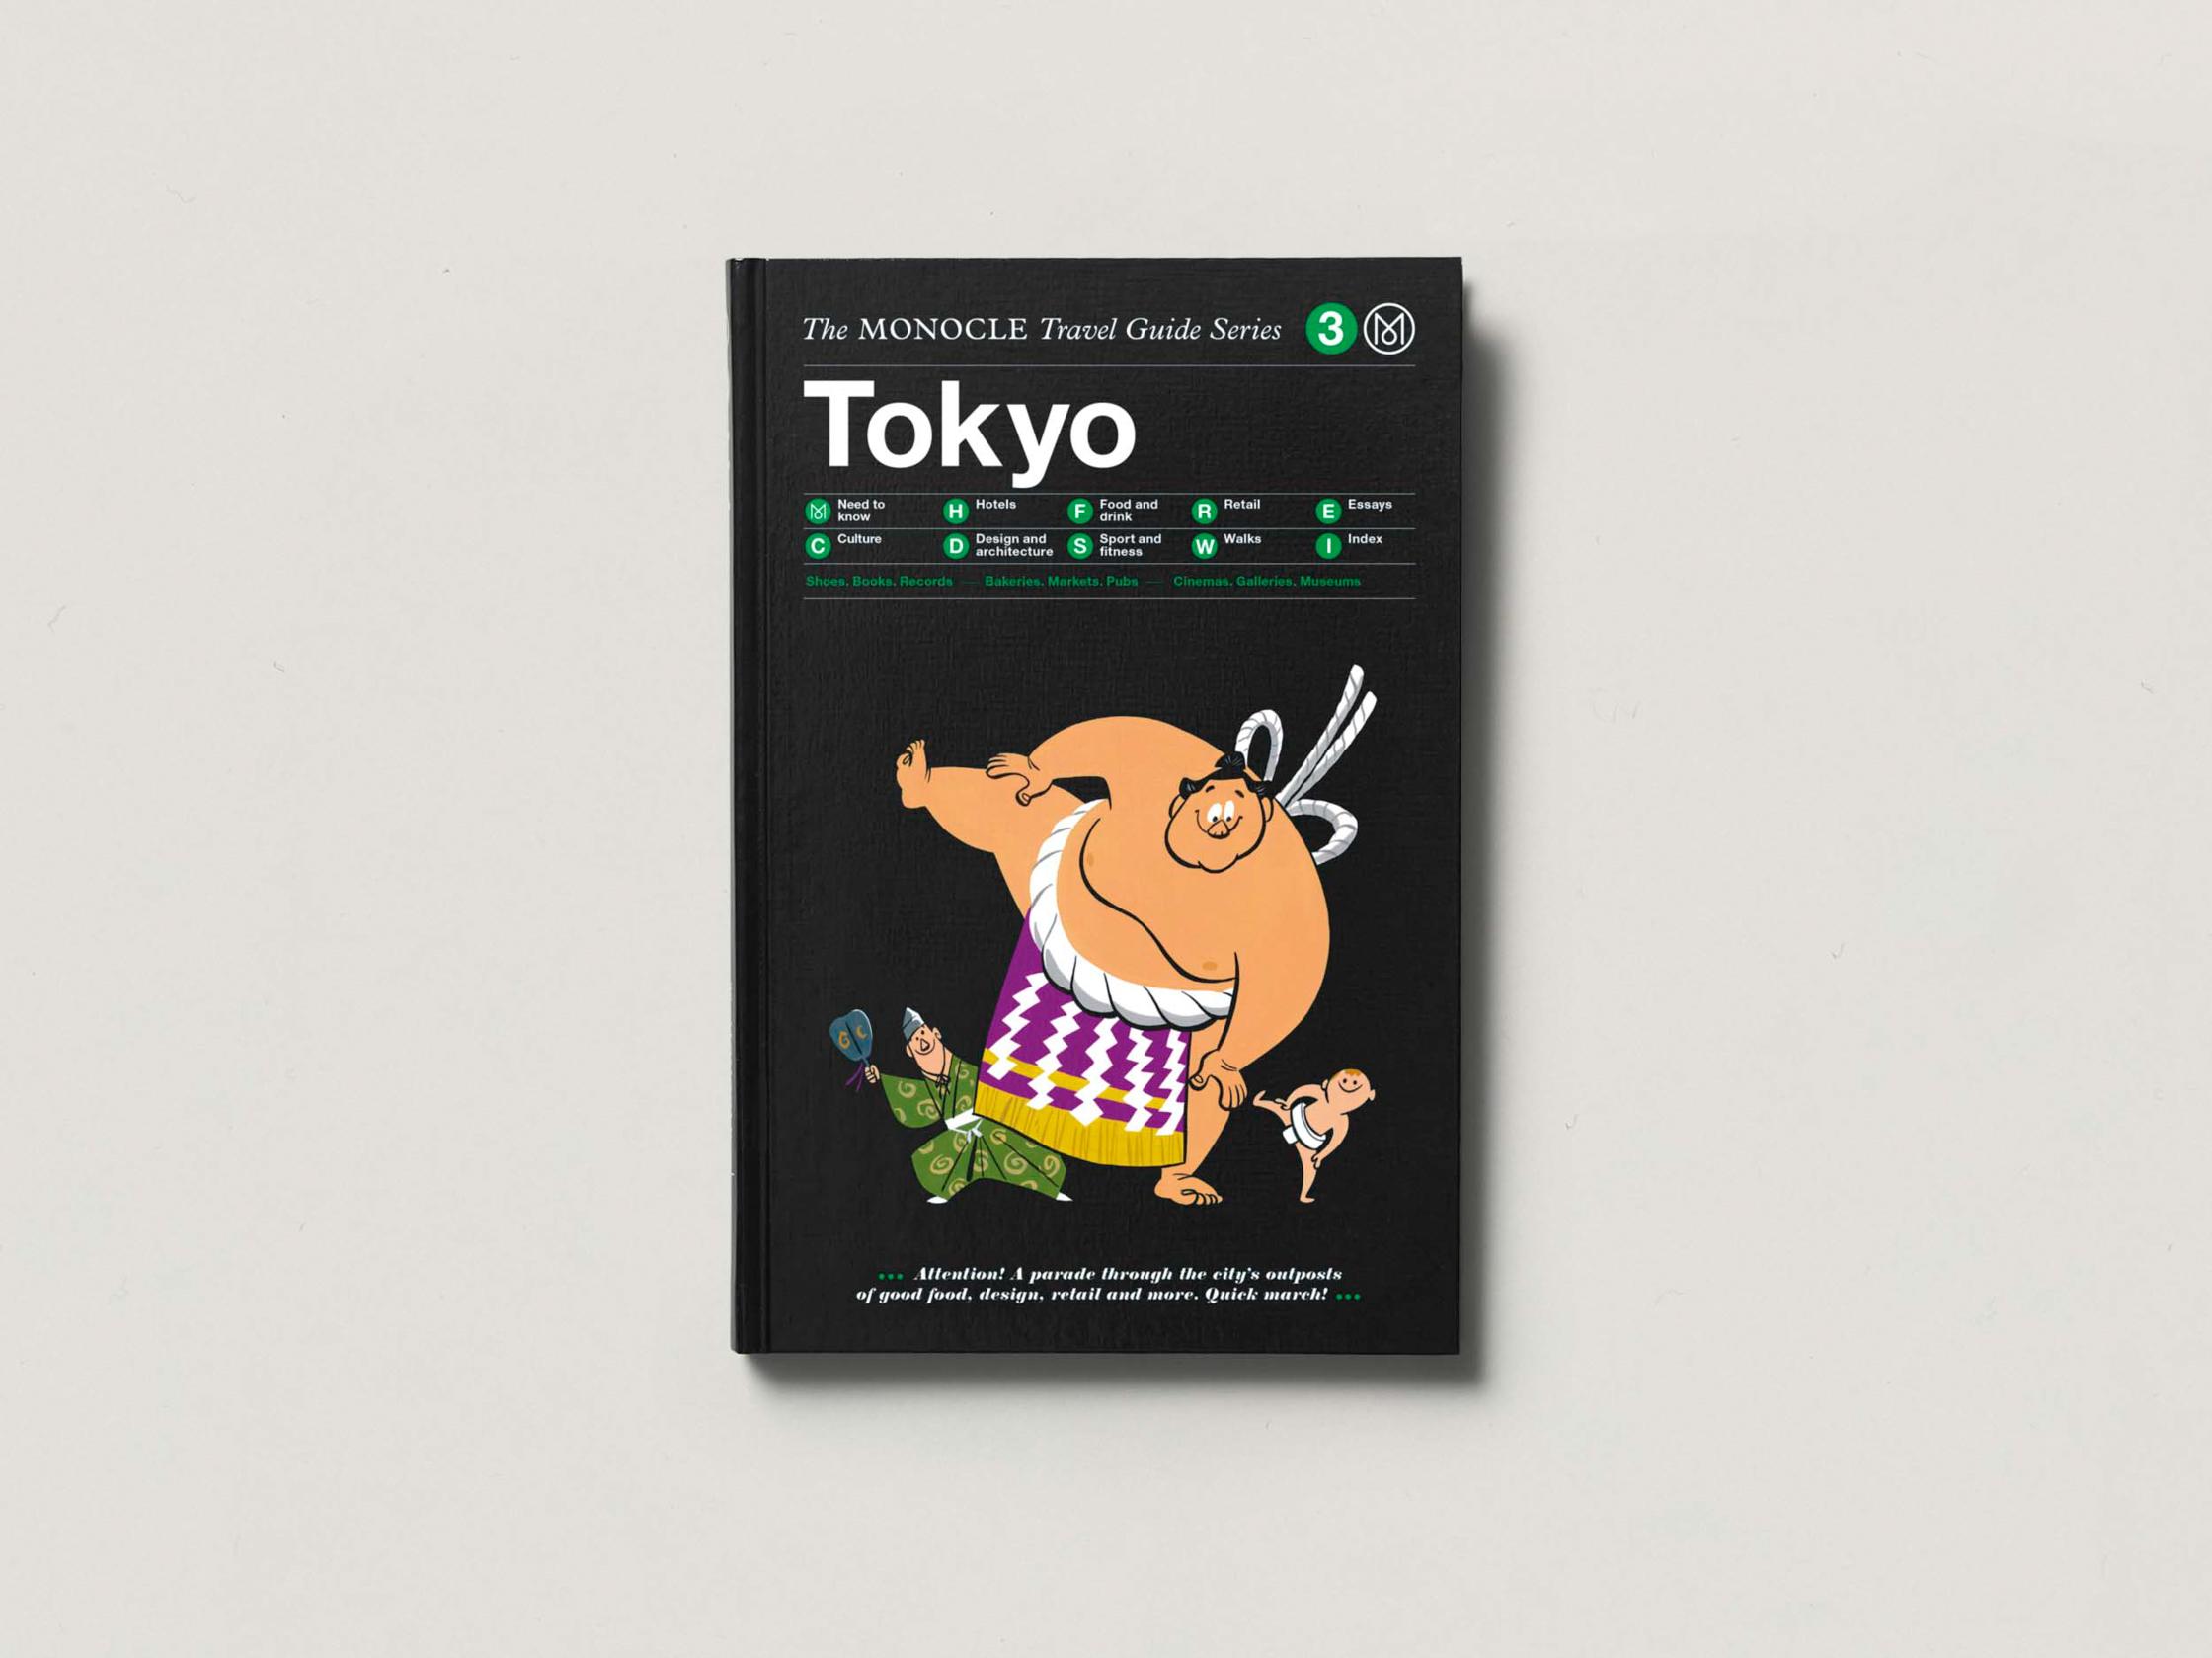 Monocle Travel Guides The Monocle Travel Guide Series 03 Tokyo